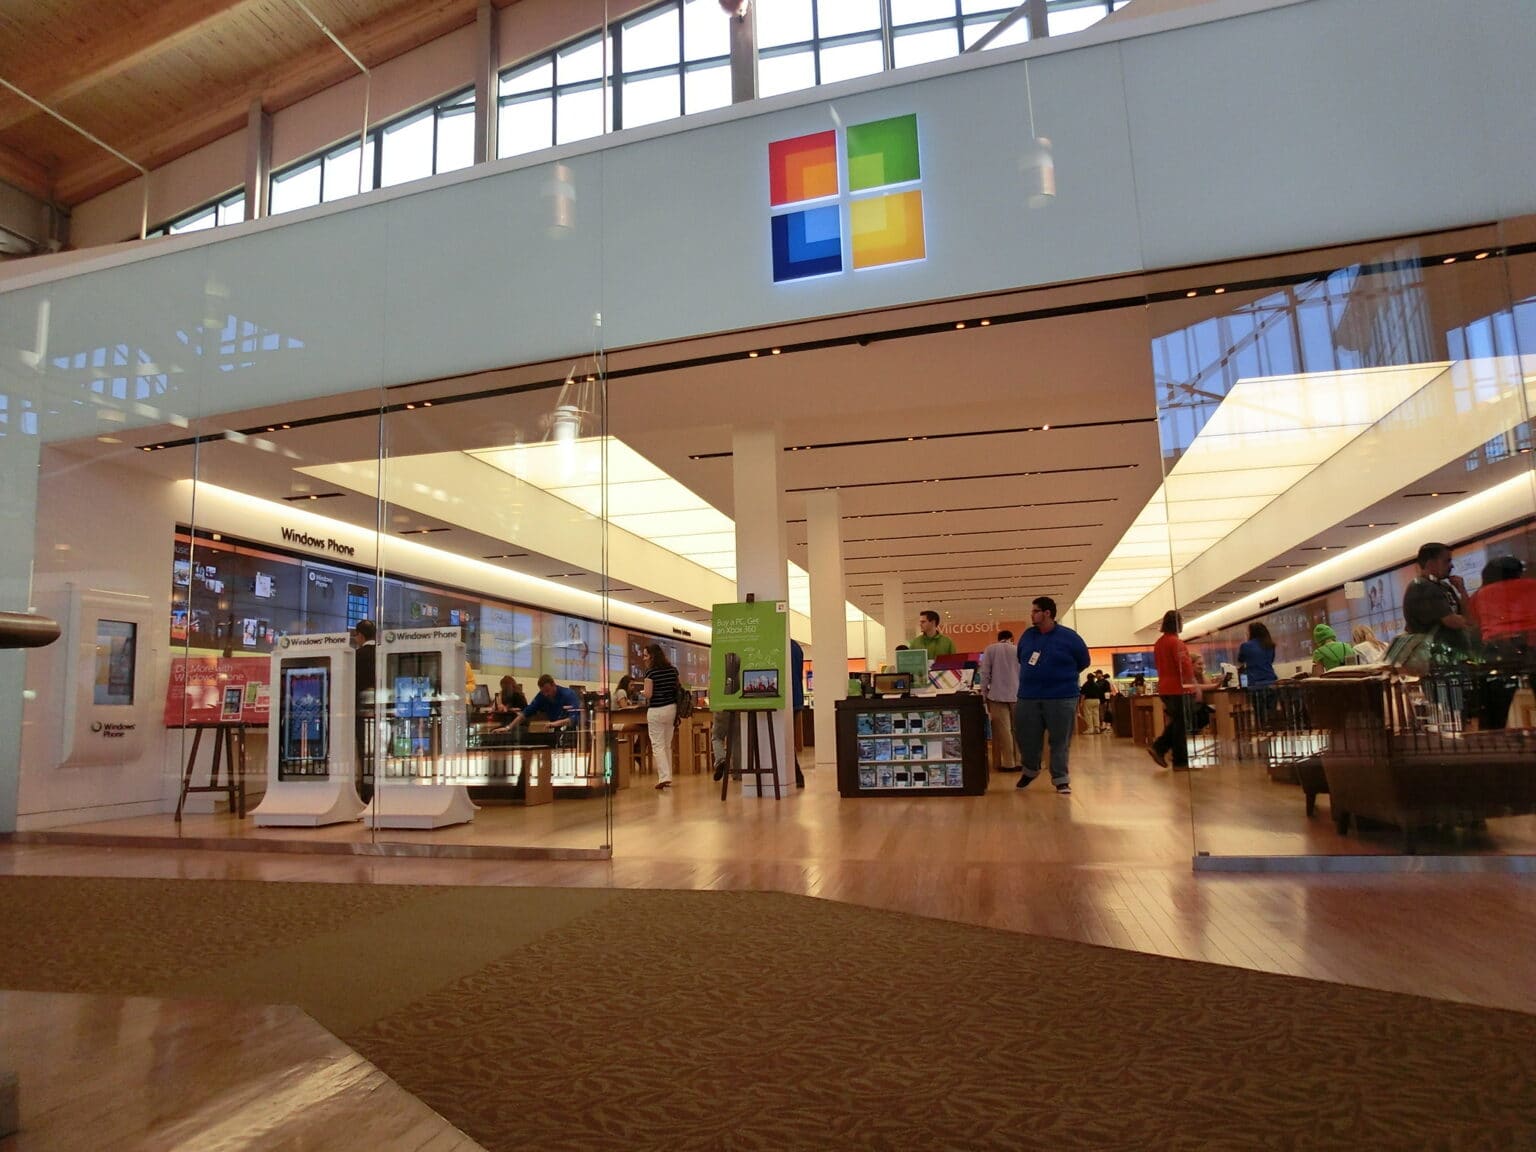 Unlike Apple's retail meccas, Microsoft Stores never became successes.